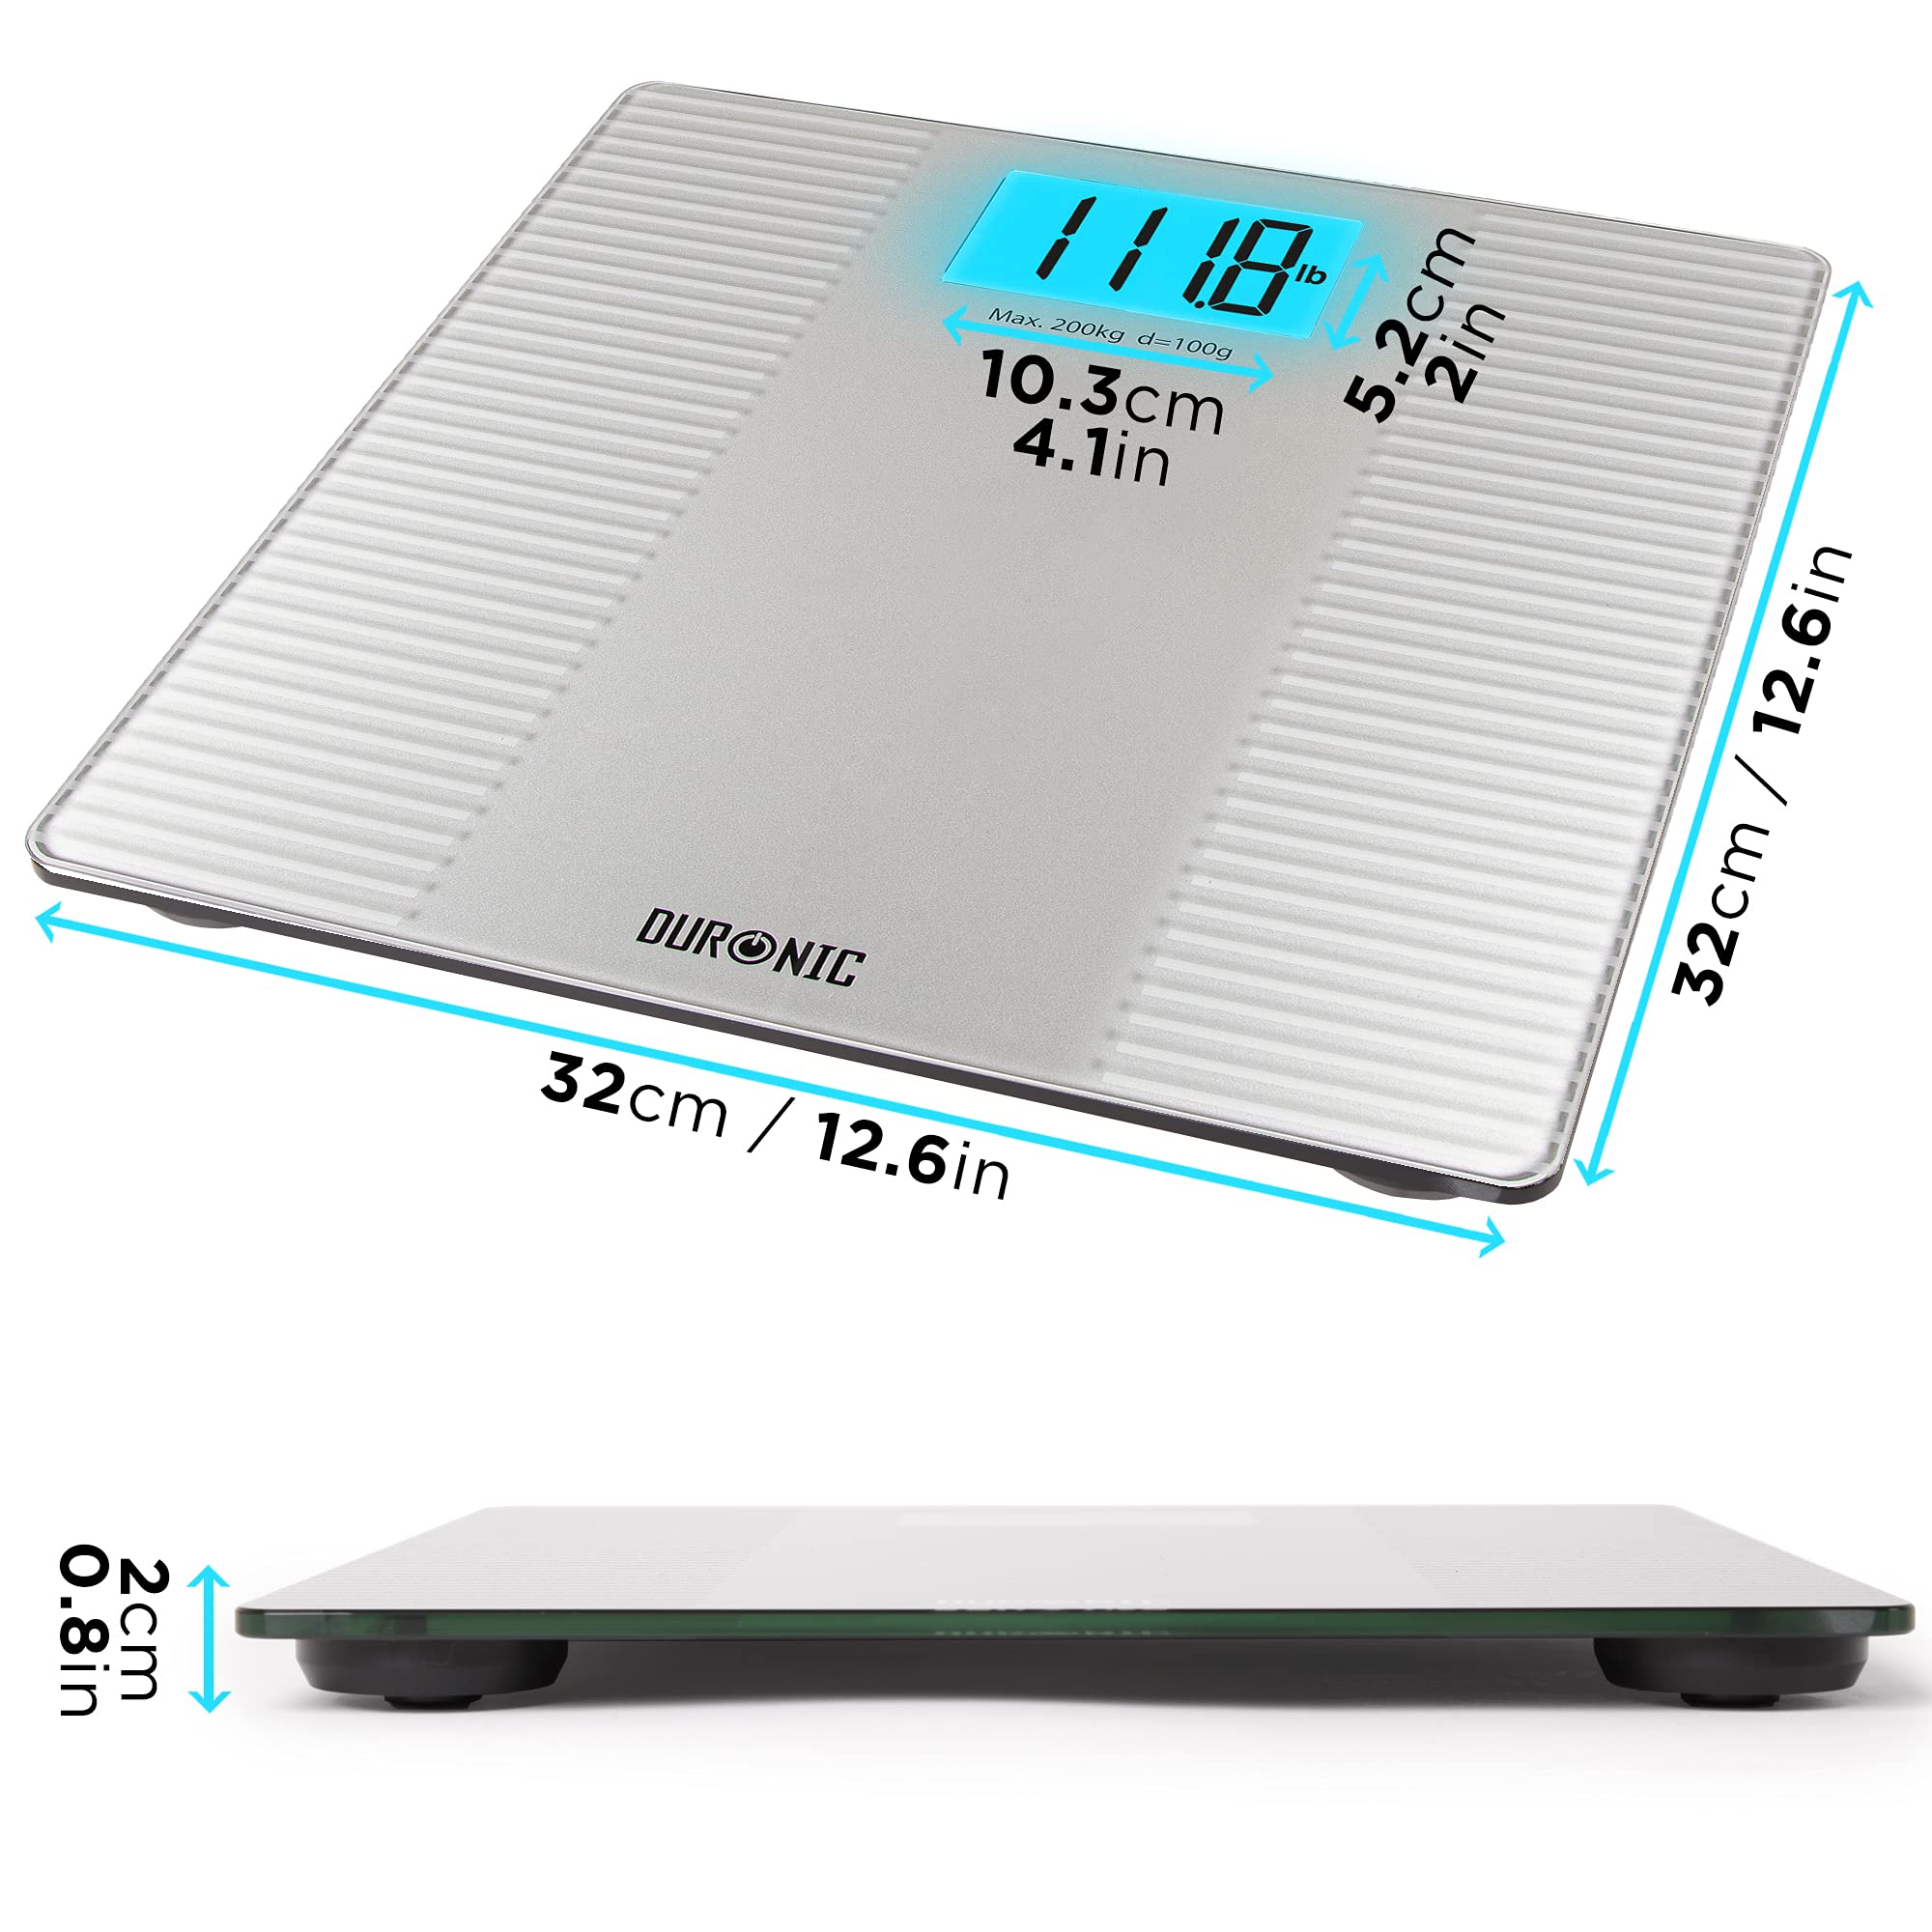 Duronic Body Scales BS203 SR | Measures Body Weight in Kilograms, Pounds & Stones | Silver Non-Slip Design | Step-On Activation Bathroom Scales | Precision Sensors | XL Digital Display | 200kg Capacity